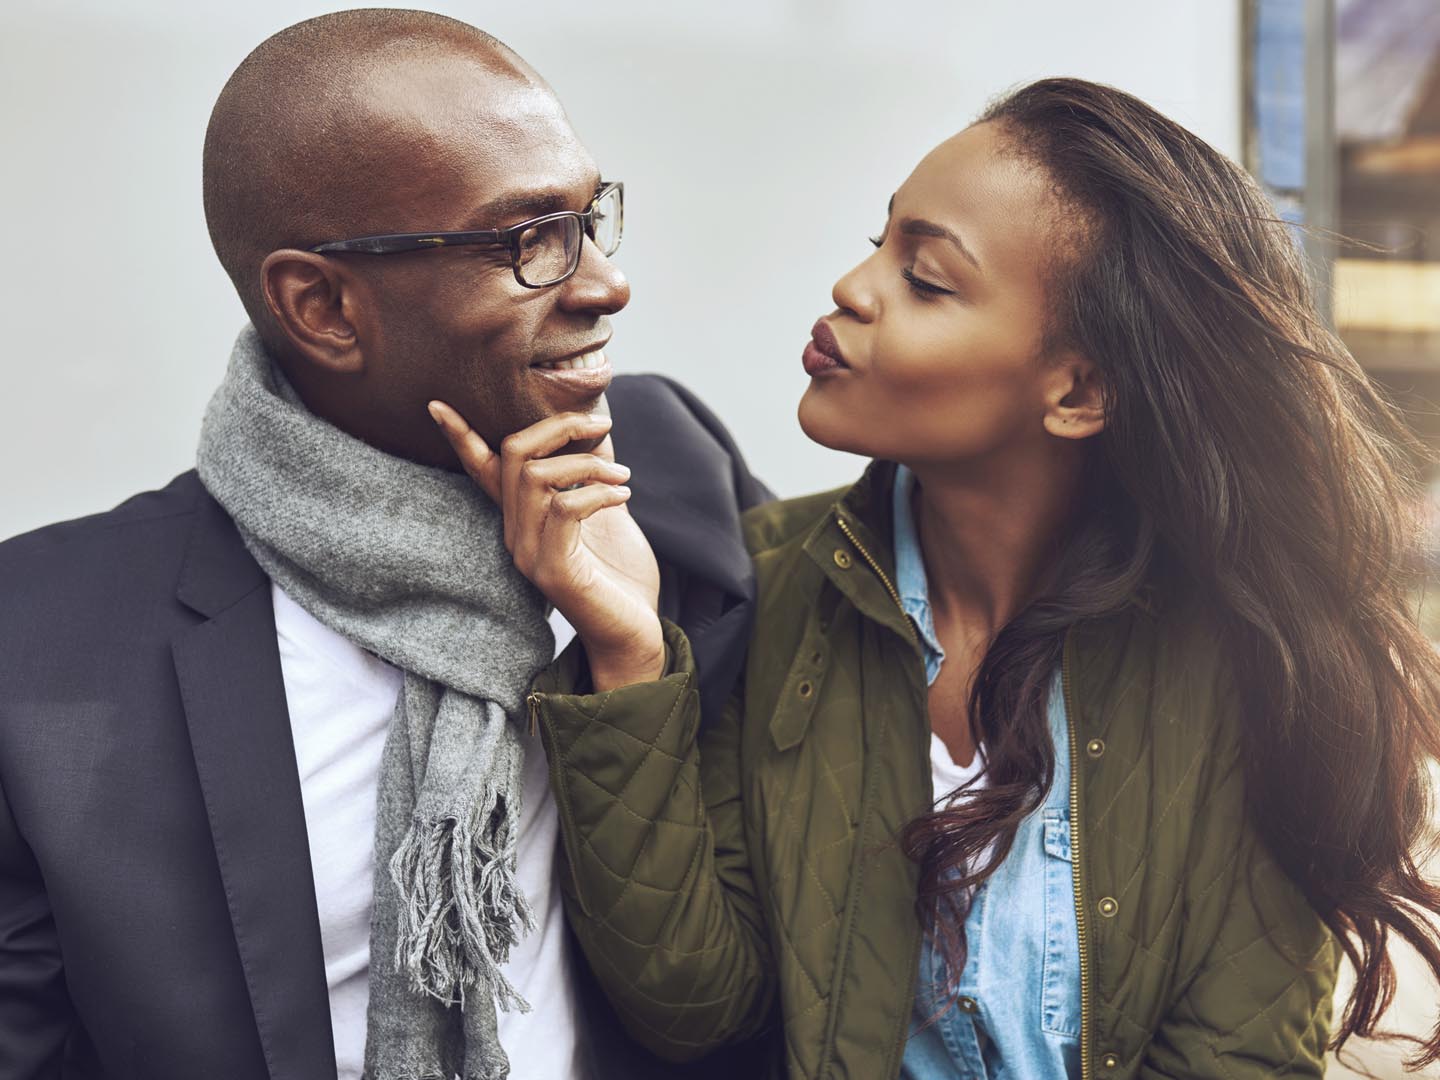 Flirting young African American woman pursing her lips for a kiss and caressing the face of a handsome man in glasses as they enjoy a date together